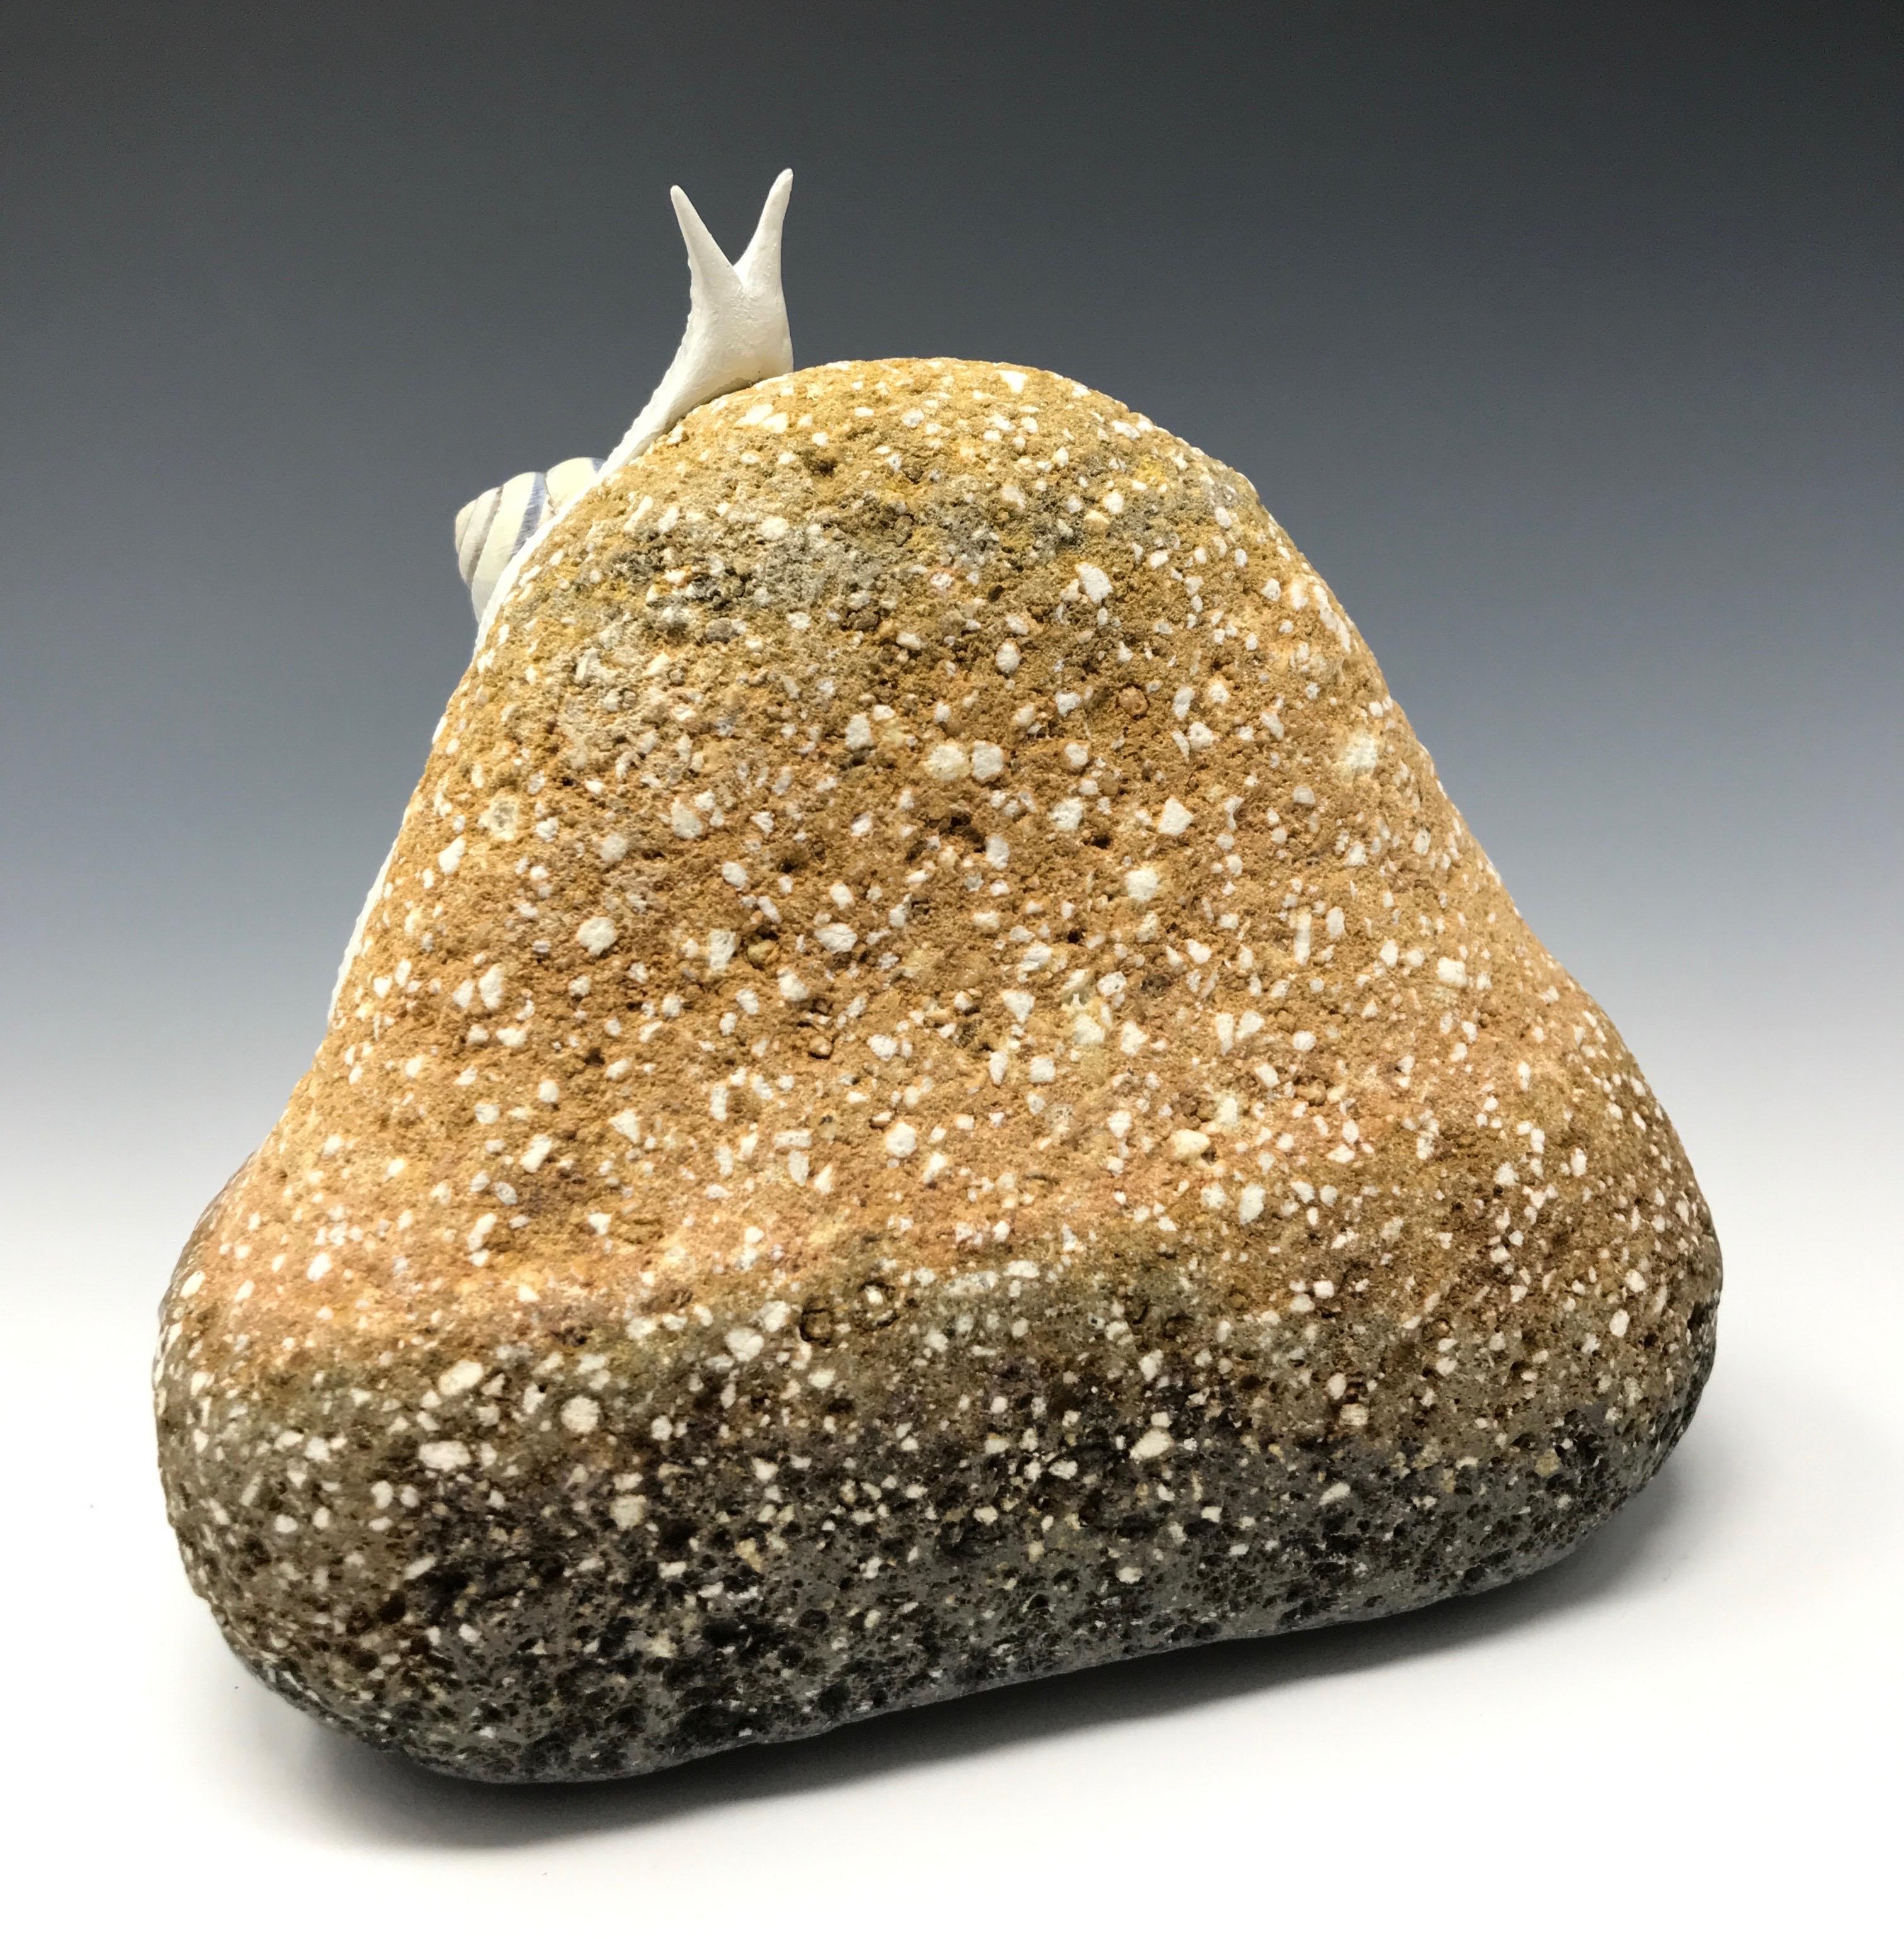 This piece was created with a real found snail shell and durable epoxy clay by New York artist, Bethany Krull. The artist sculpted the undulating snail directly onto a weathered brick found shore-side. The glistening wet snail form is surfaced with